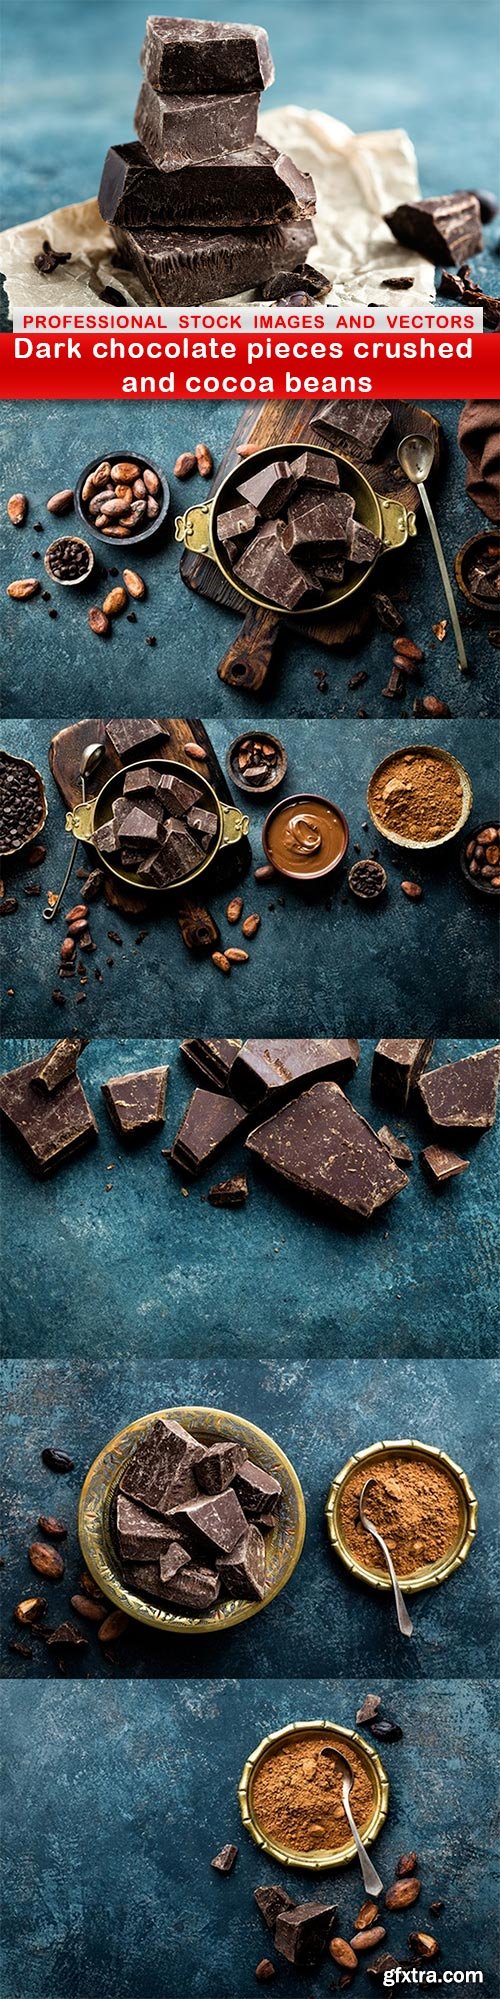 Dark chocolate pieces crushed and cocoa beans - 6 UHQ JPEG